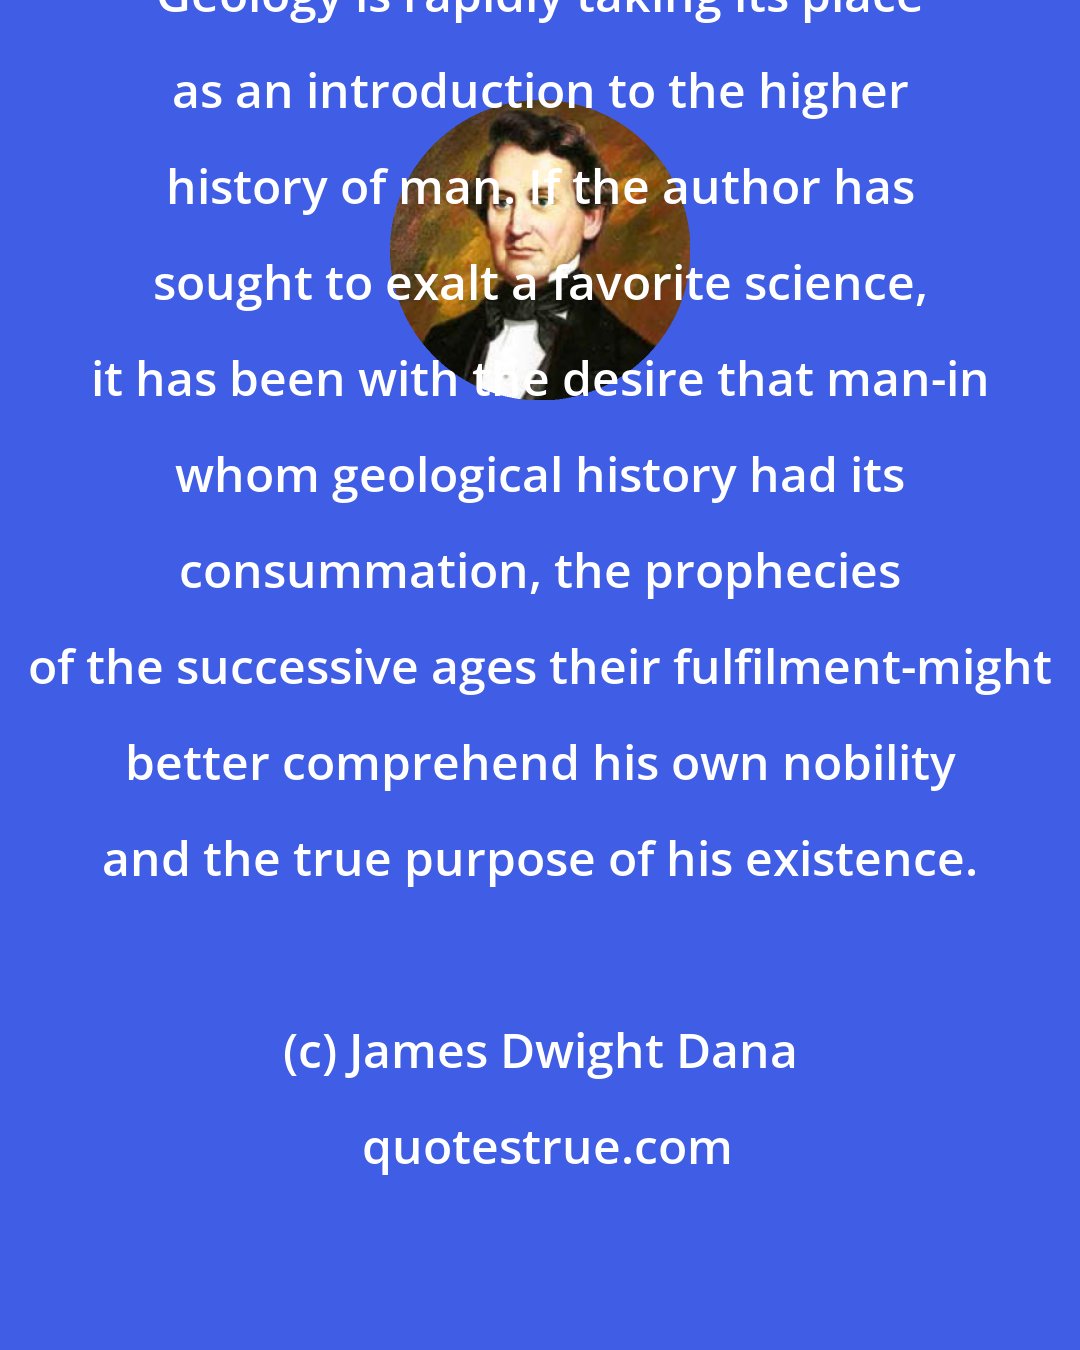 James Dwight Dana: Geology is rapidly taking its place as an introduction to the higher history of man. If the author has sought to exalt a favorite science, it has been with the desire that man-in whom geological history had its consummation, the prophecies of the successive ages their fulfilment-might better comprehend his own nobility and the true purpose of his existence.